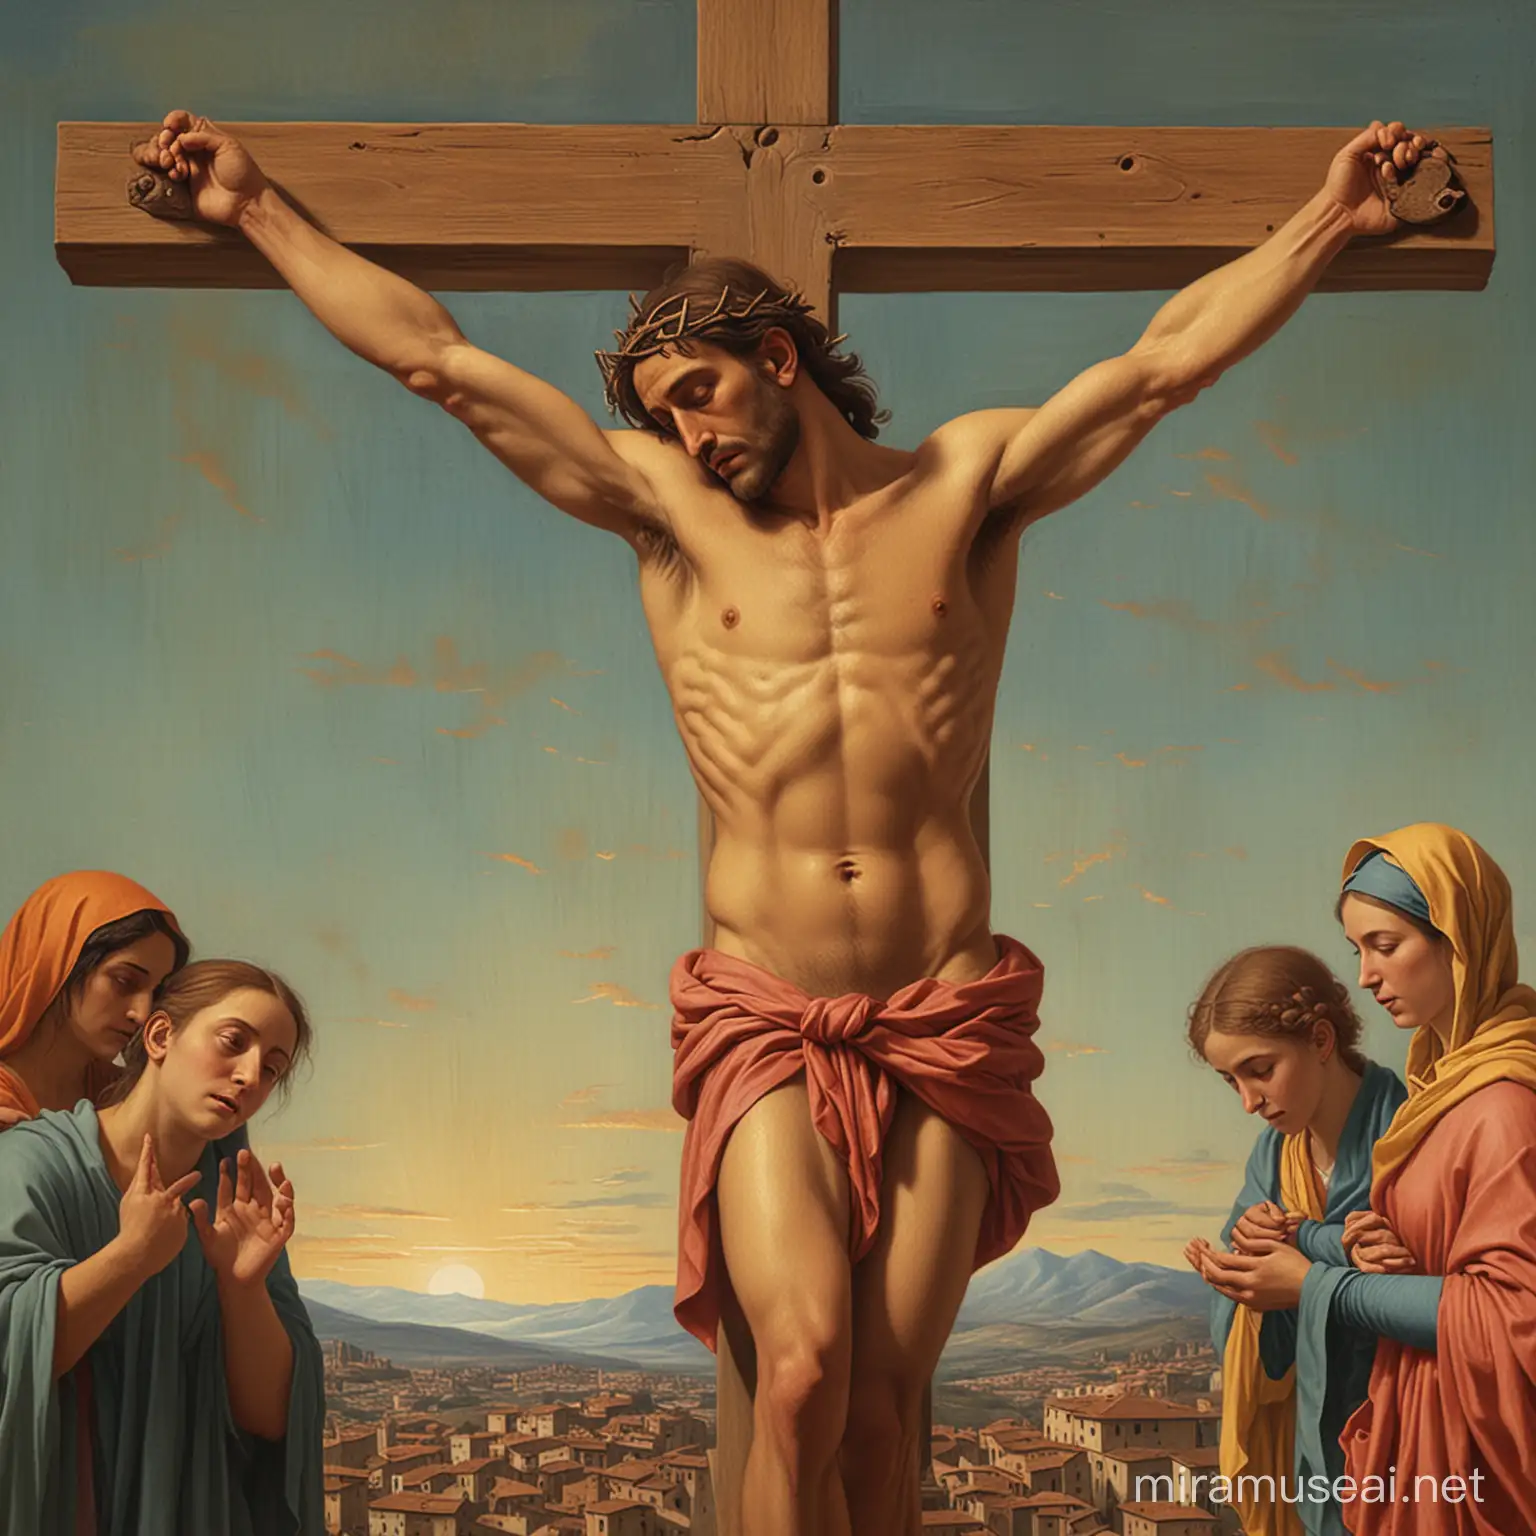 Realistic Crucifixion Painting in the Style of Masaccio